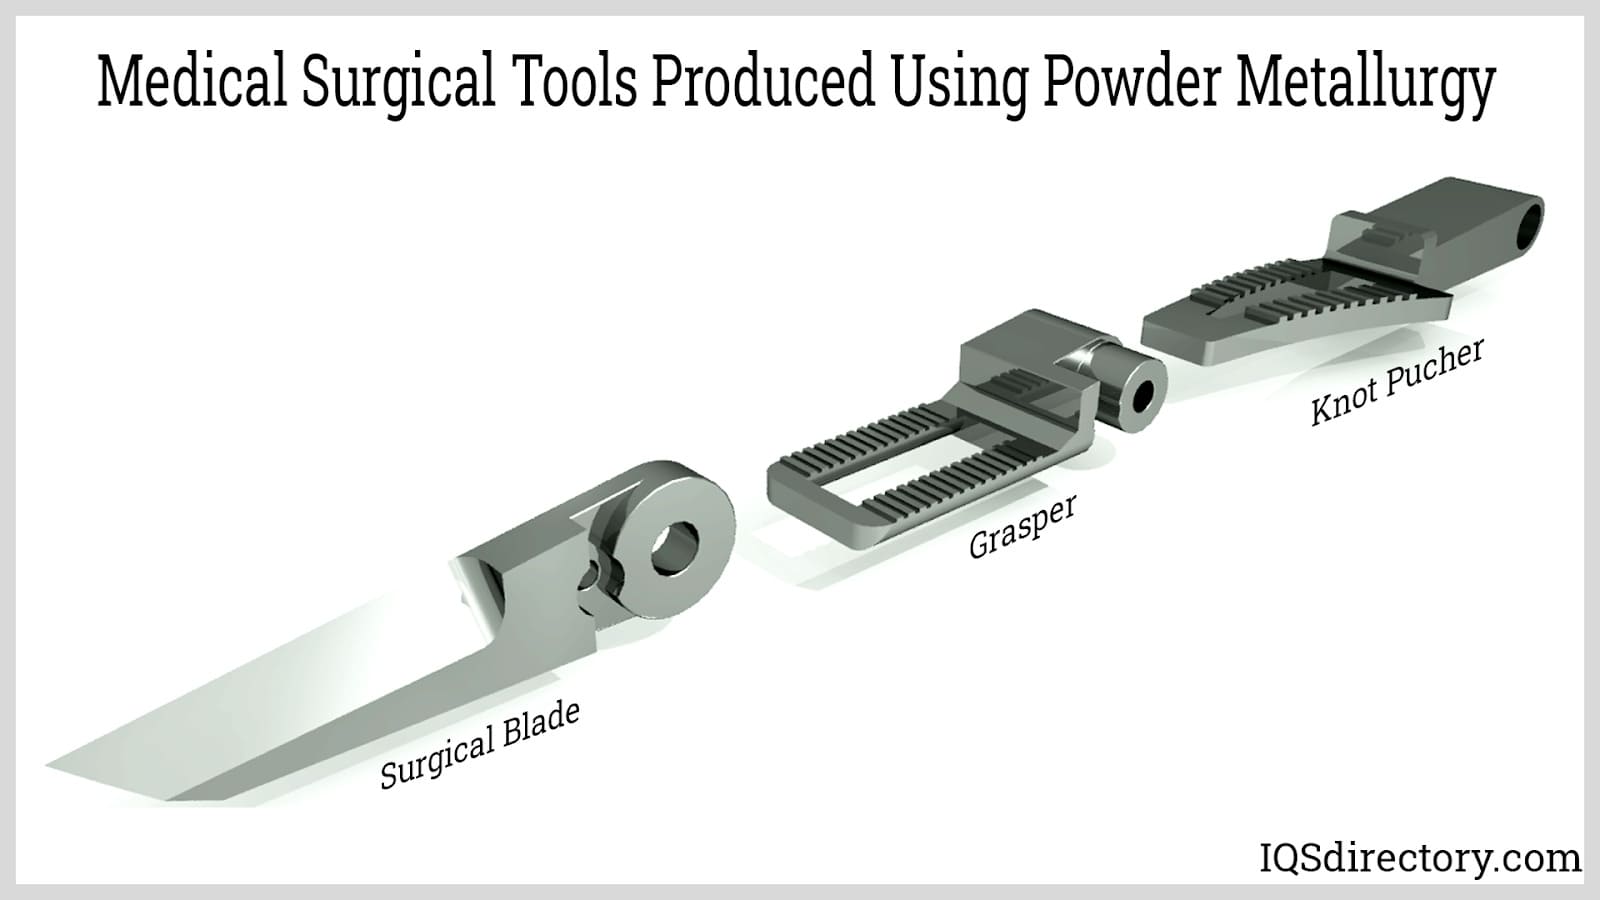 Medical Surgical Tools Produced Using Powder Metallurgy